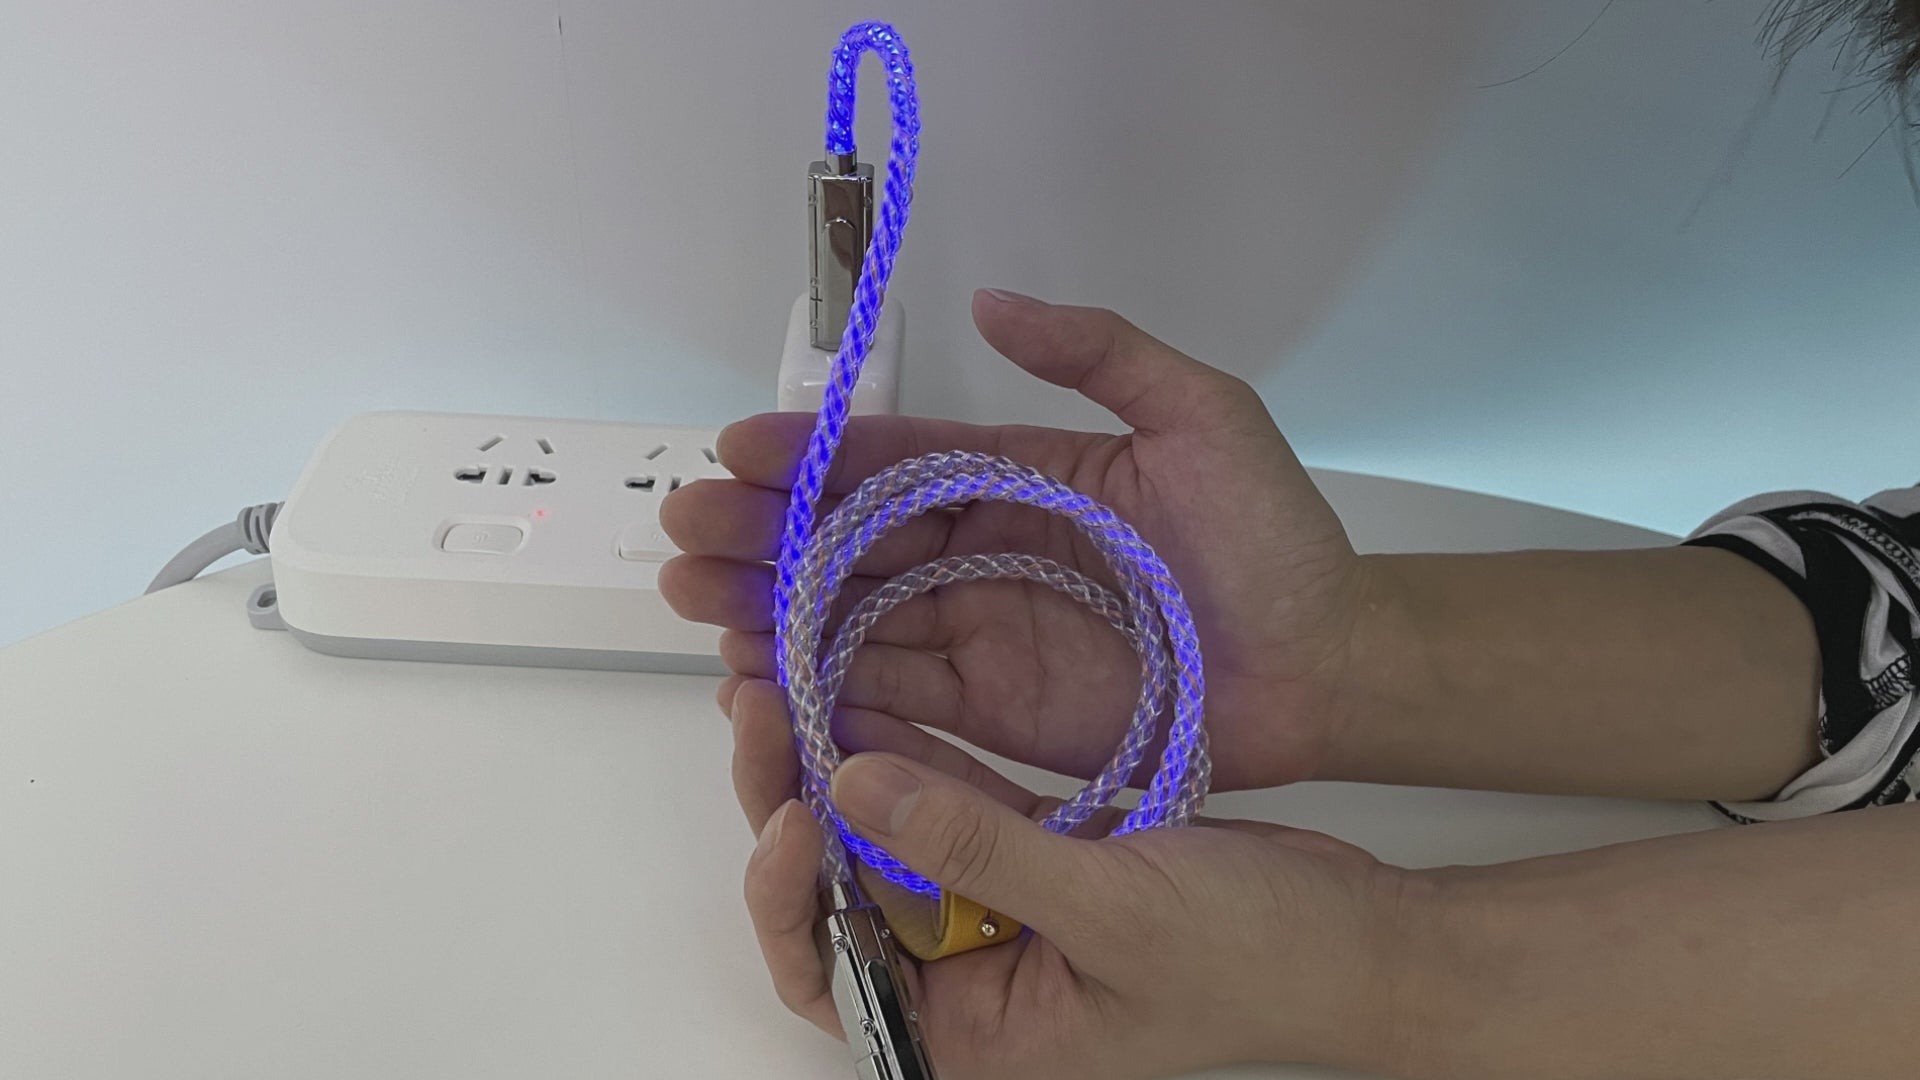 4 in 1 Multi Charger Cord, 3FT/1M USB Universal Flowing LED Light Up Phone Charge Cable